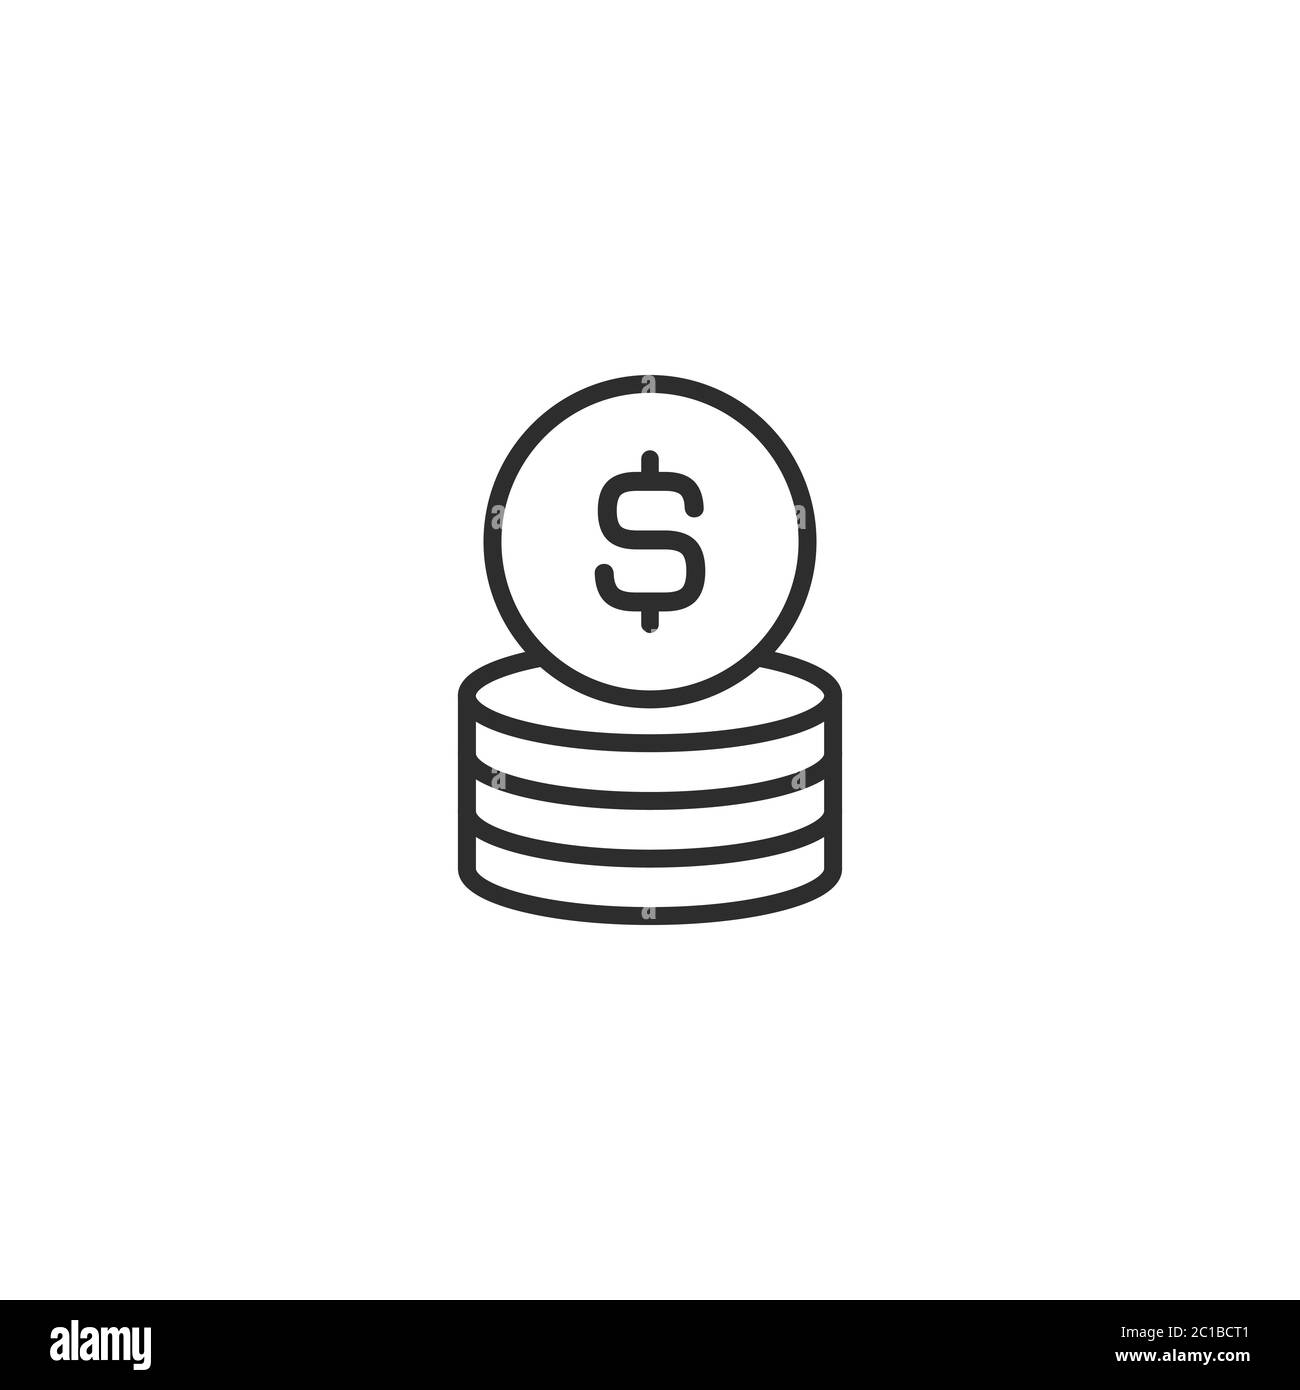 Stack of dollar coins with coin in front of it. Flat black icon. Isolated on white. Economy, finance, money pictogram. Wealth symbol. Vector illustrat Stock Vector